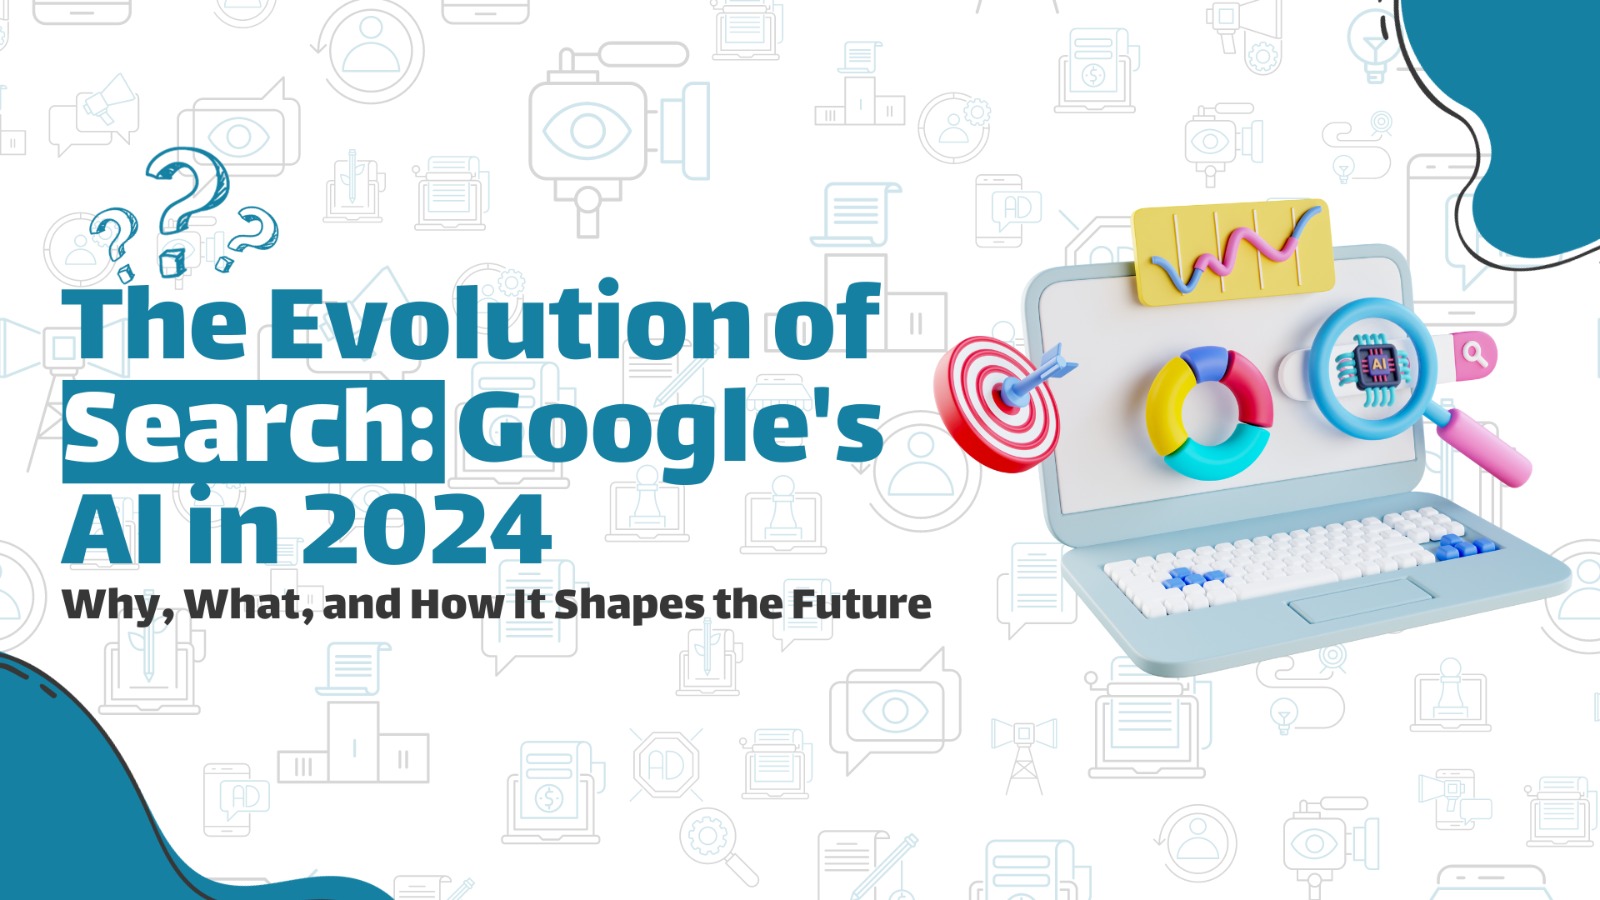 The Evolution of Search: Google's AI in 2024 - Why, What, and How It Shapes the Future